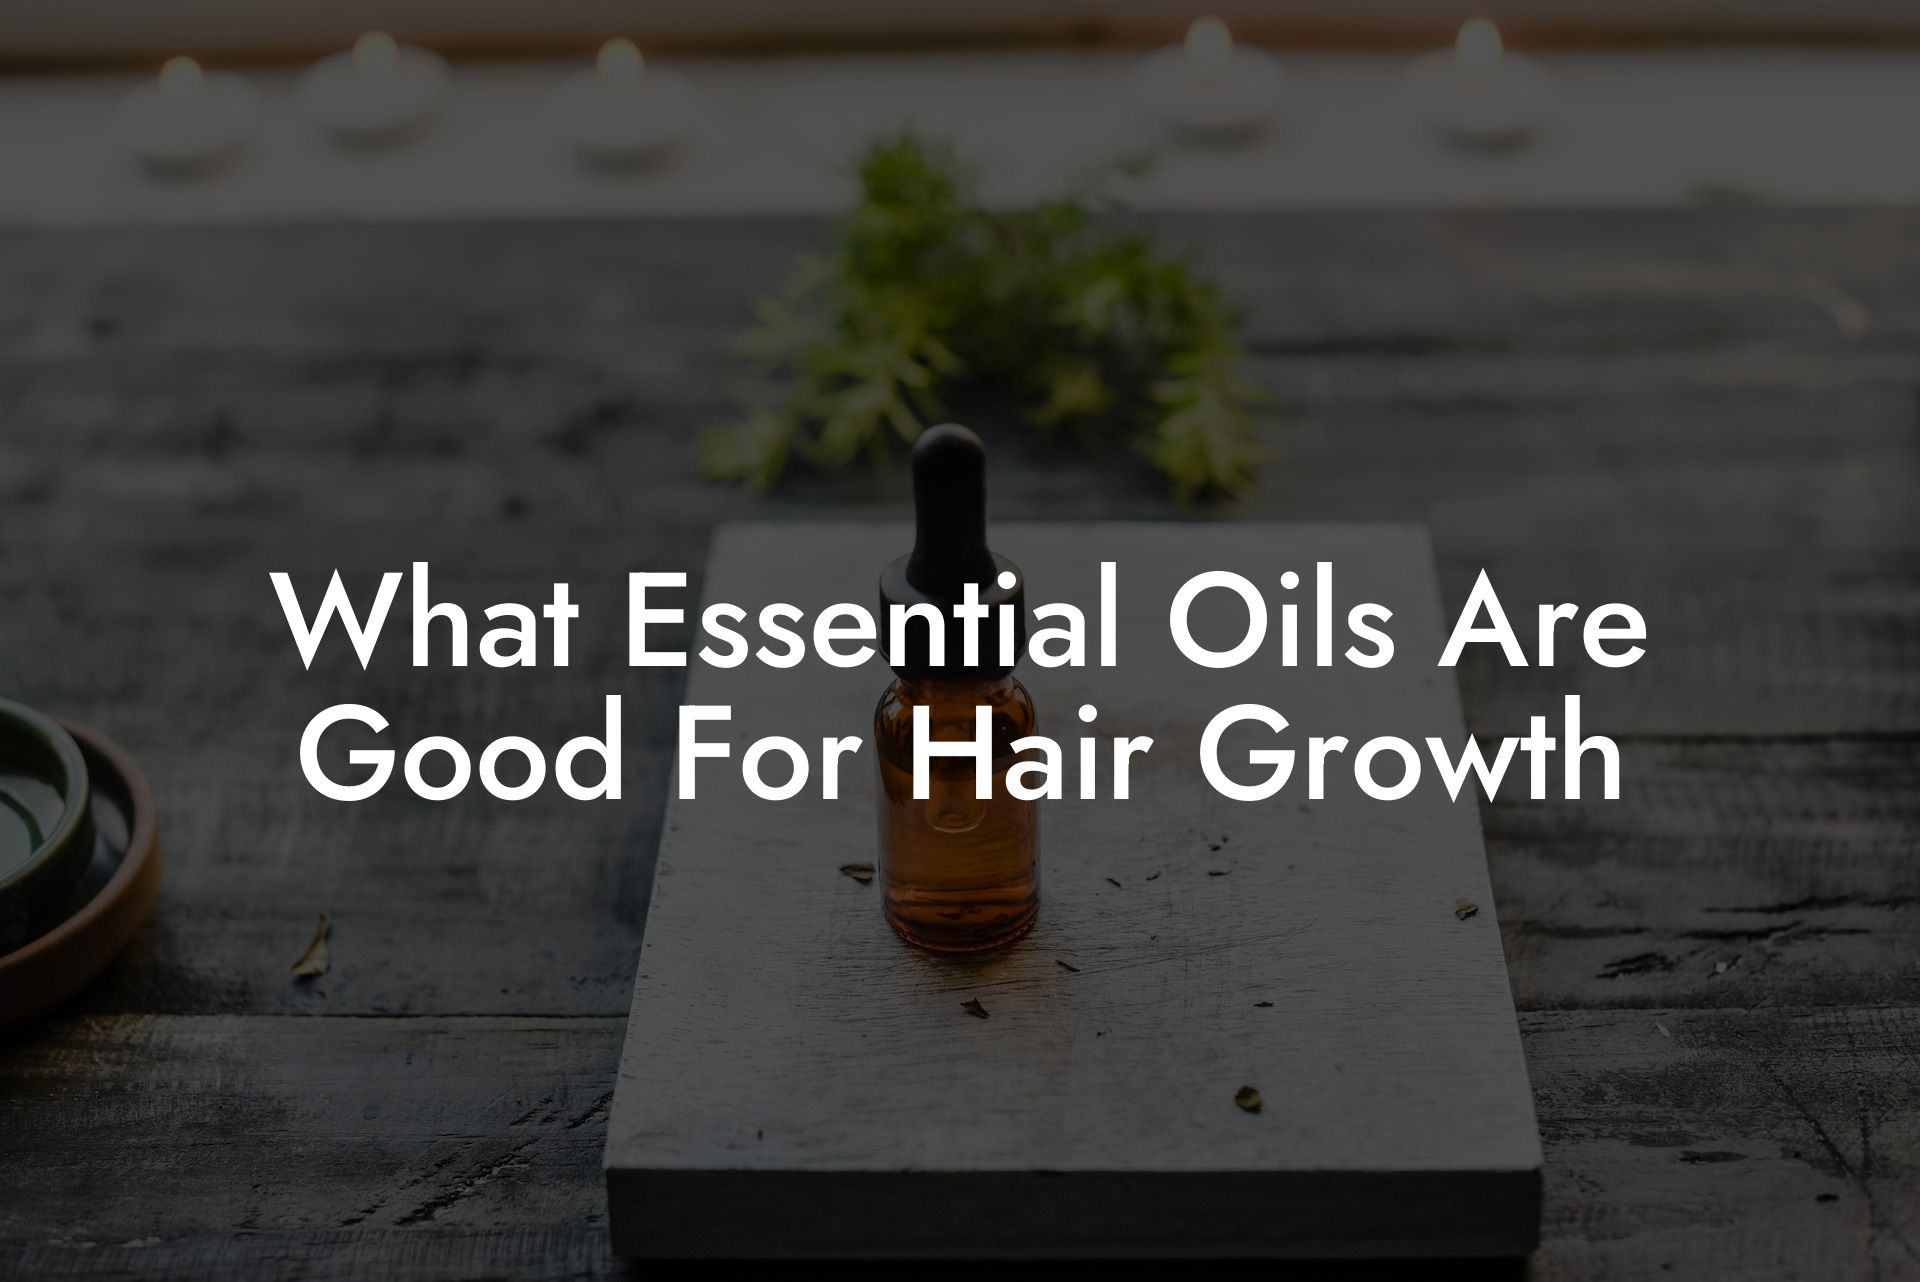 What Essential Oils Are Good For Hair Growth